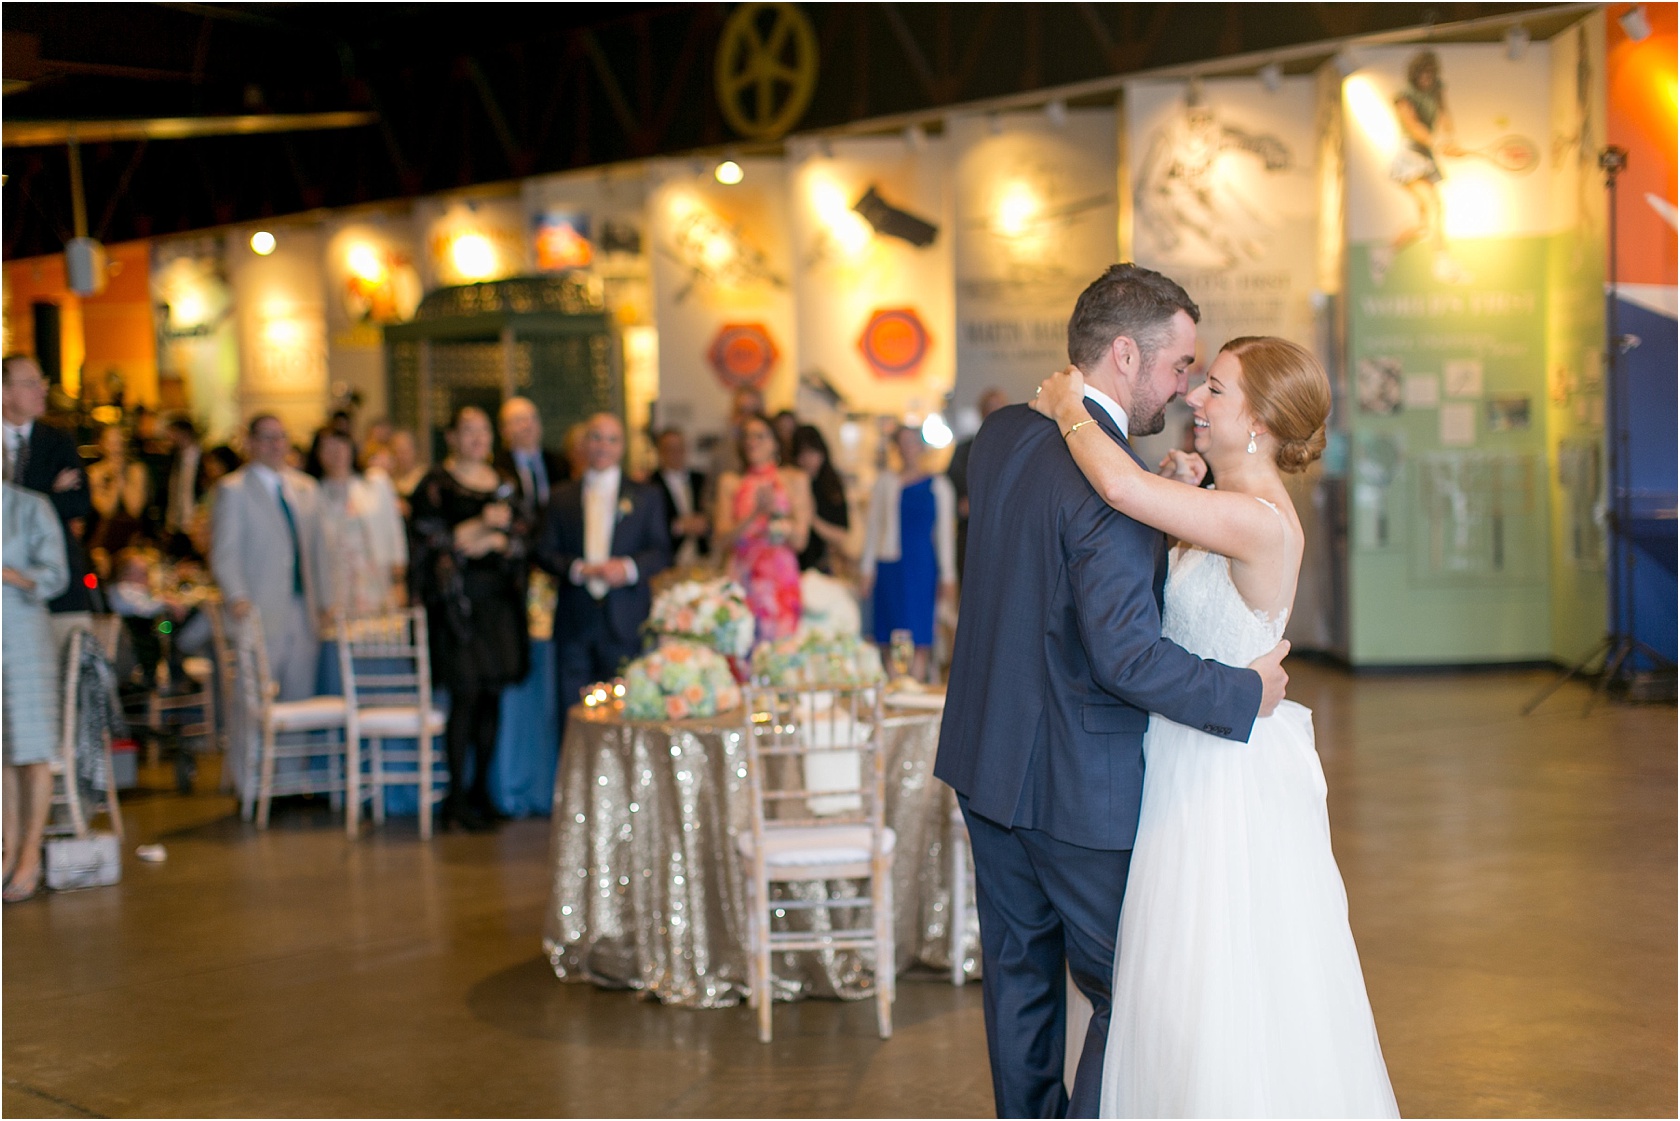 Rowland Baltimore Museum of Industry Wedding Living Radiant Photography photos_0131.jpg